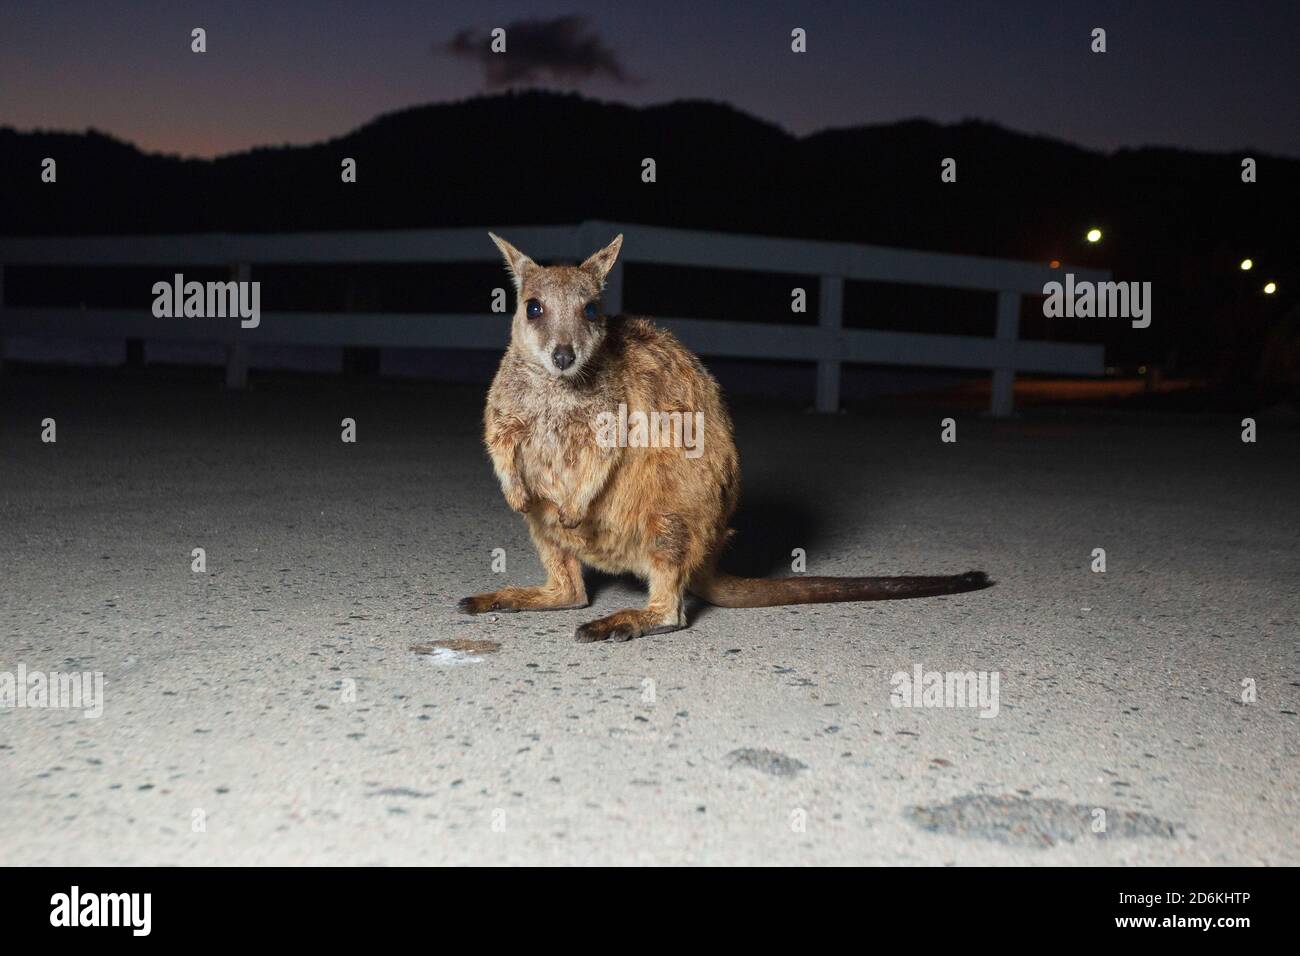 Allied Rock Wallaby (Petrogale assimilis) at Magnetic Island's Geoffrey Bay, Queensland, Australia Stock Photo